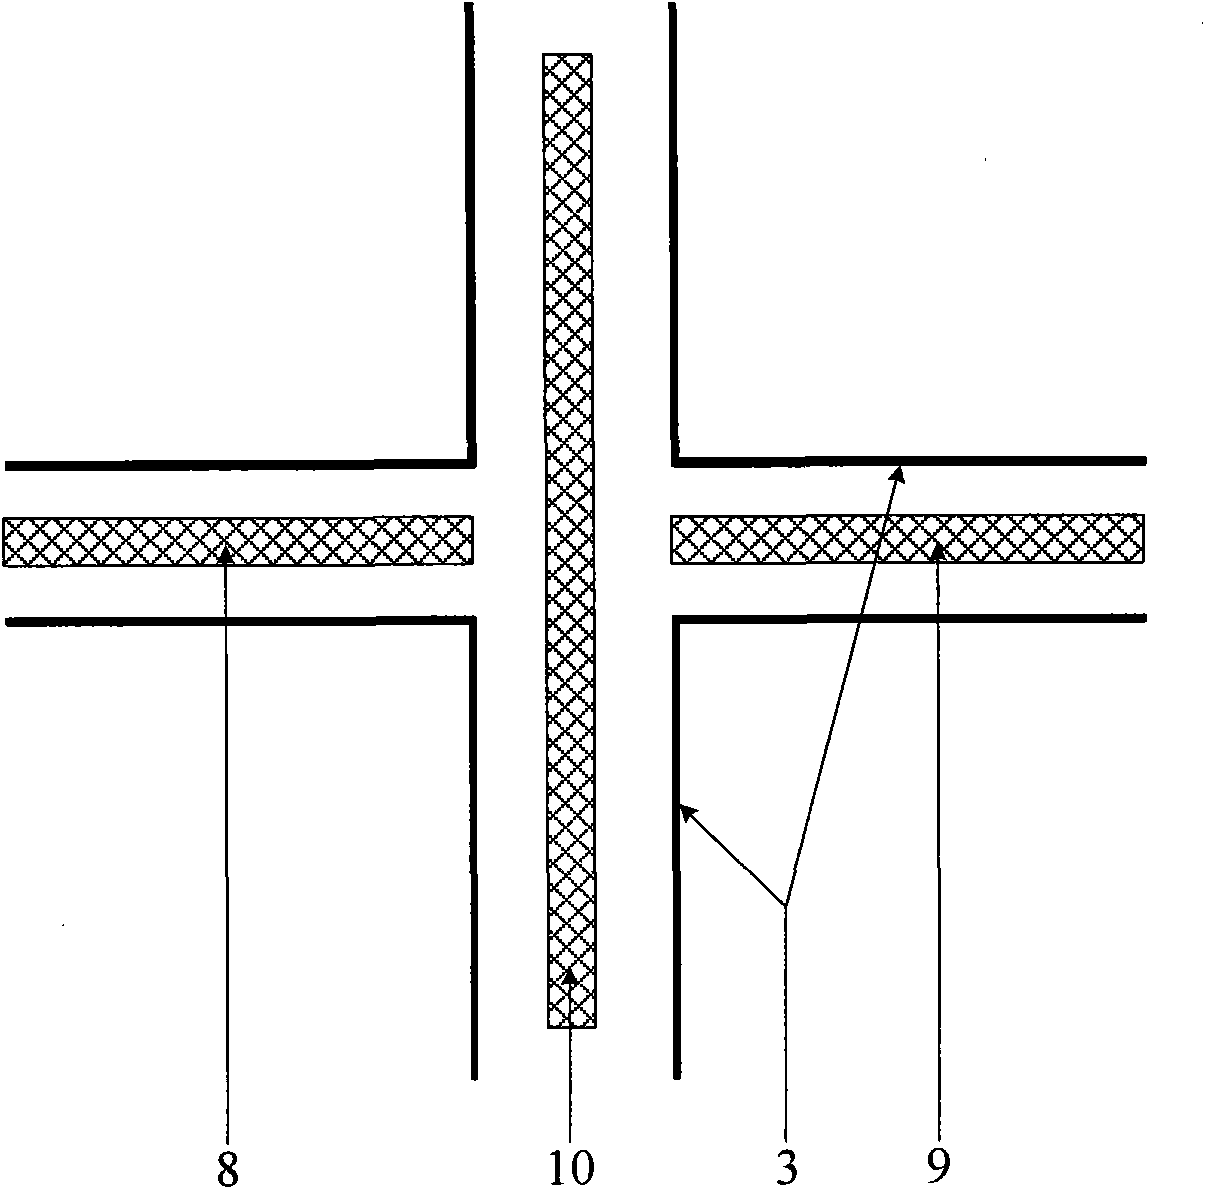 Buckling-restrained brace member consisting of four bound angle steels